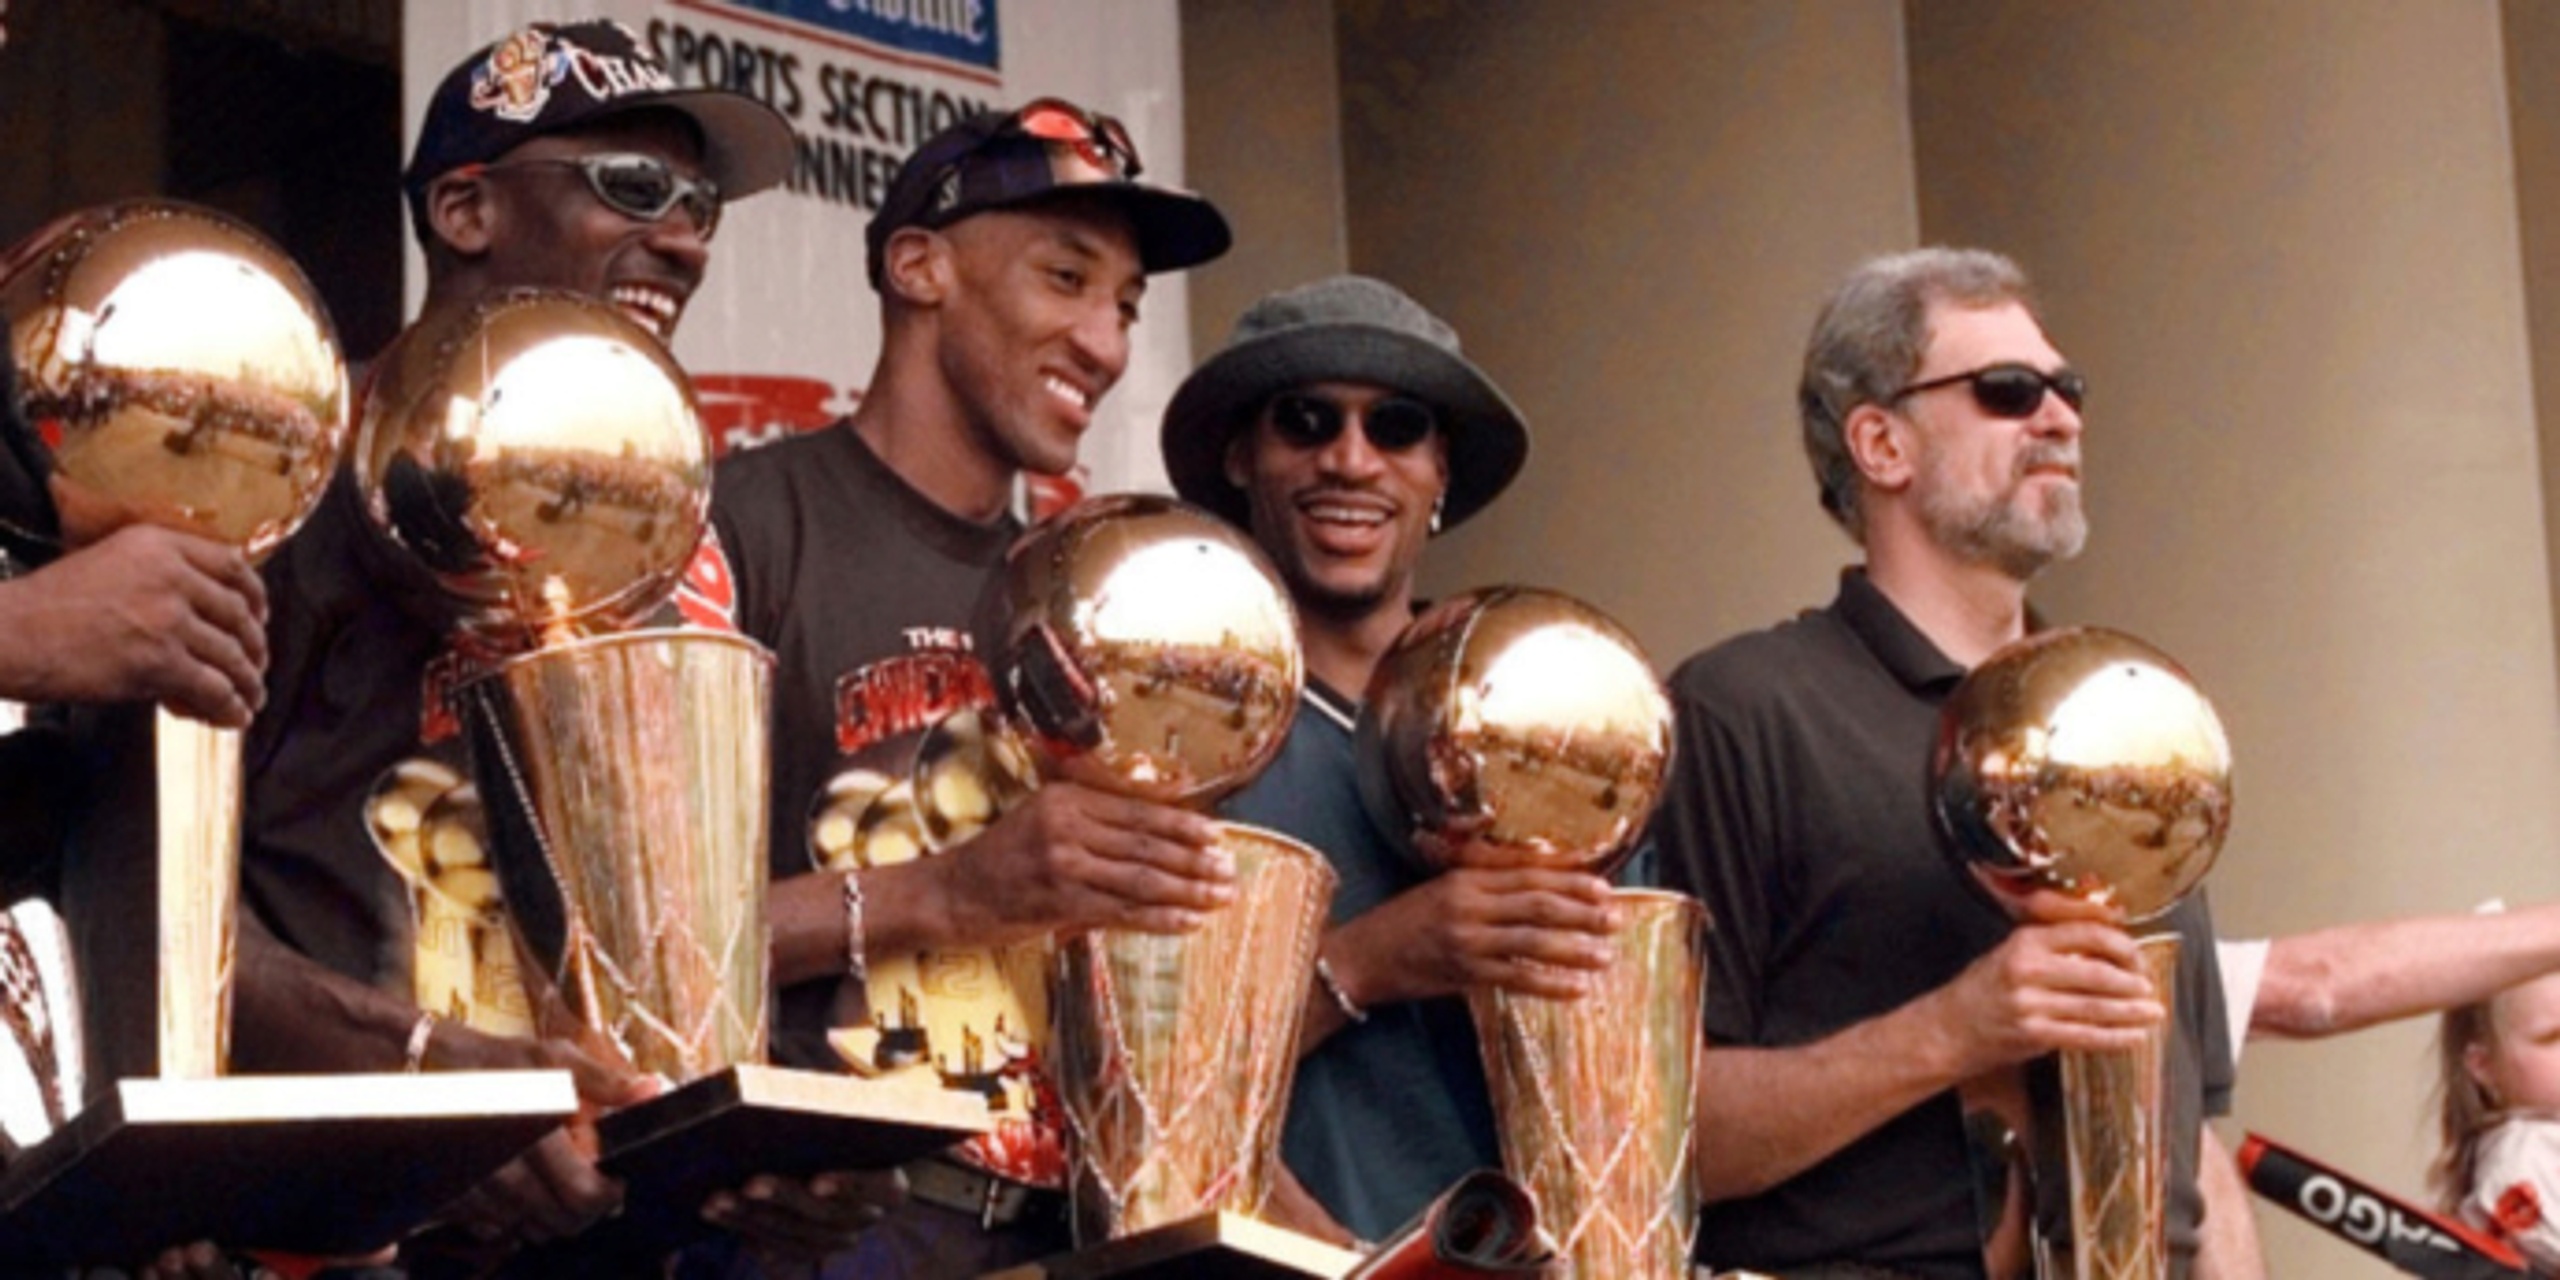 Scottie Pippen bashes Phil Jackson, says he is racist